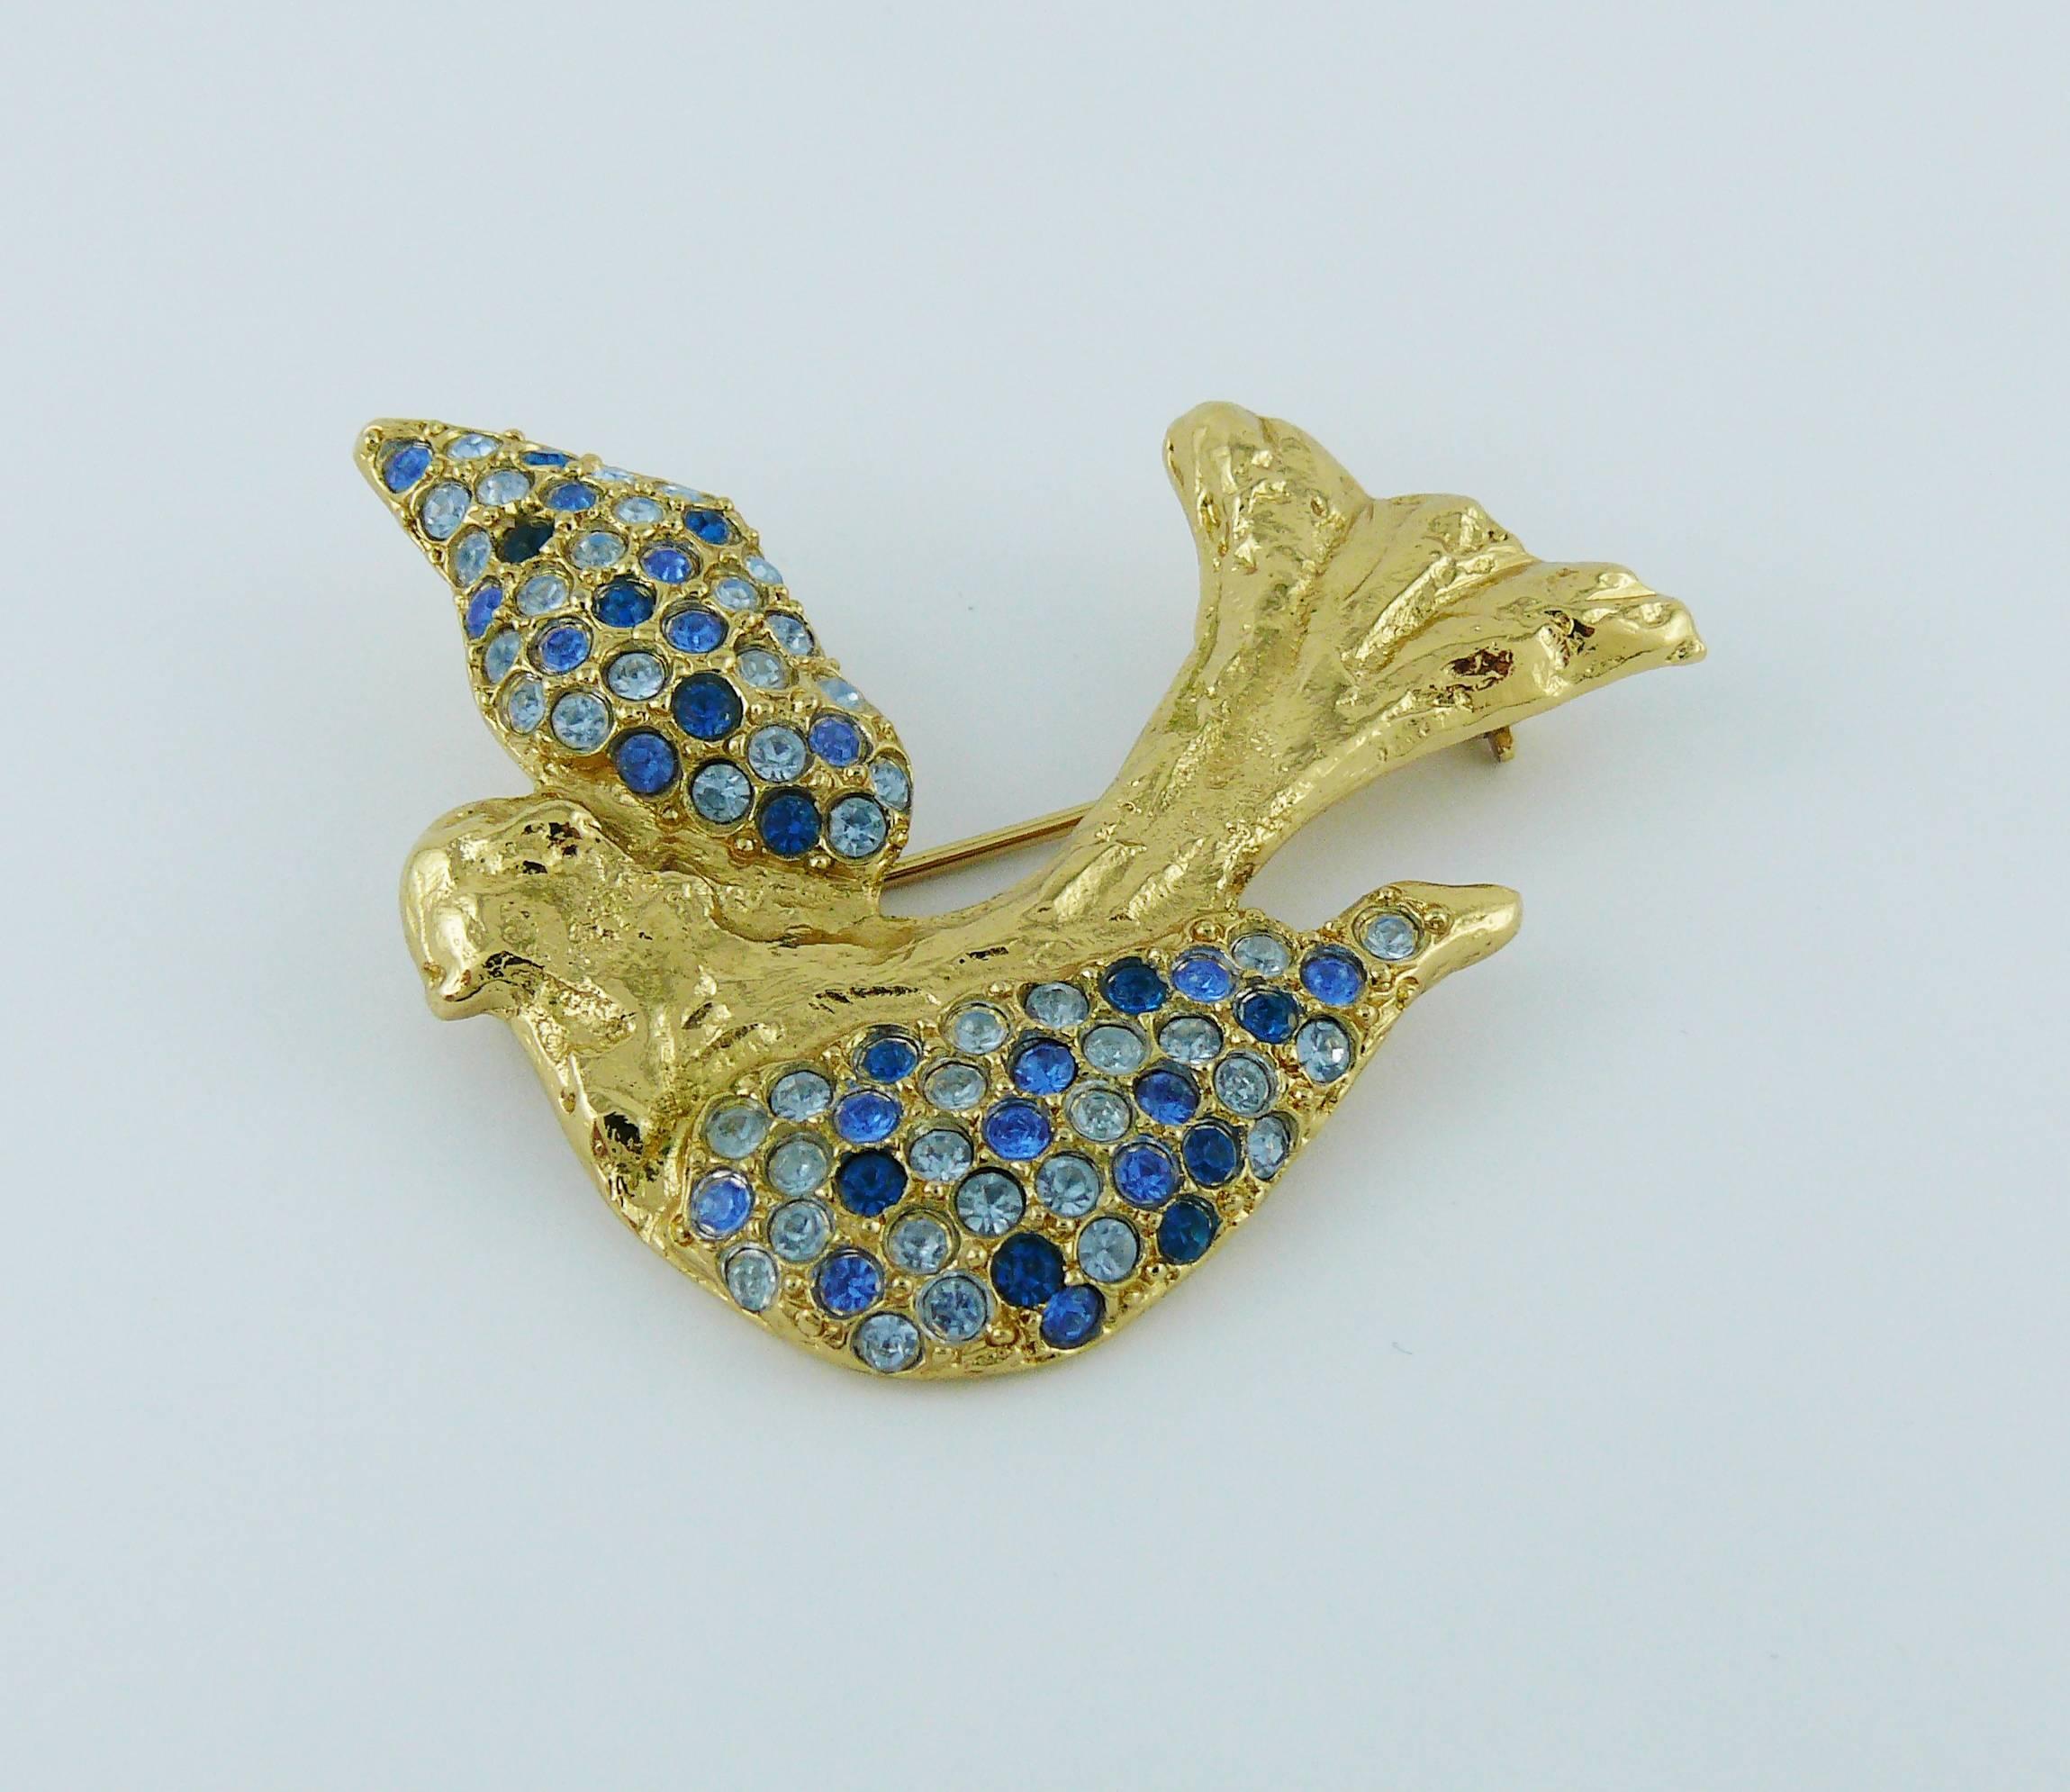 YVES SAINT LAURENT vintage gold toned bird motif brooch embellished with blue shade crystals.

Embossed YSL Made in France.

Indicative measurements : max. height approx. 5 cm (1.97 inches) / max. length approx. 5 cm (1.97 inches).

JEWELRY